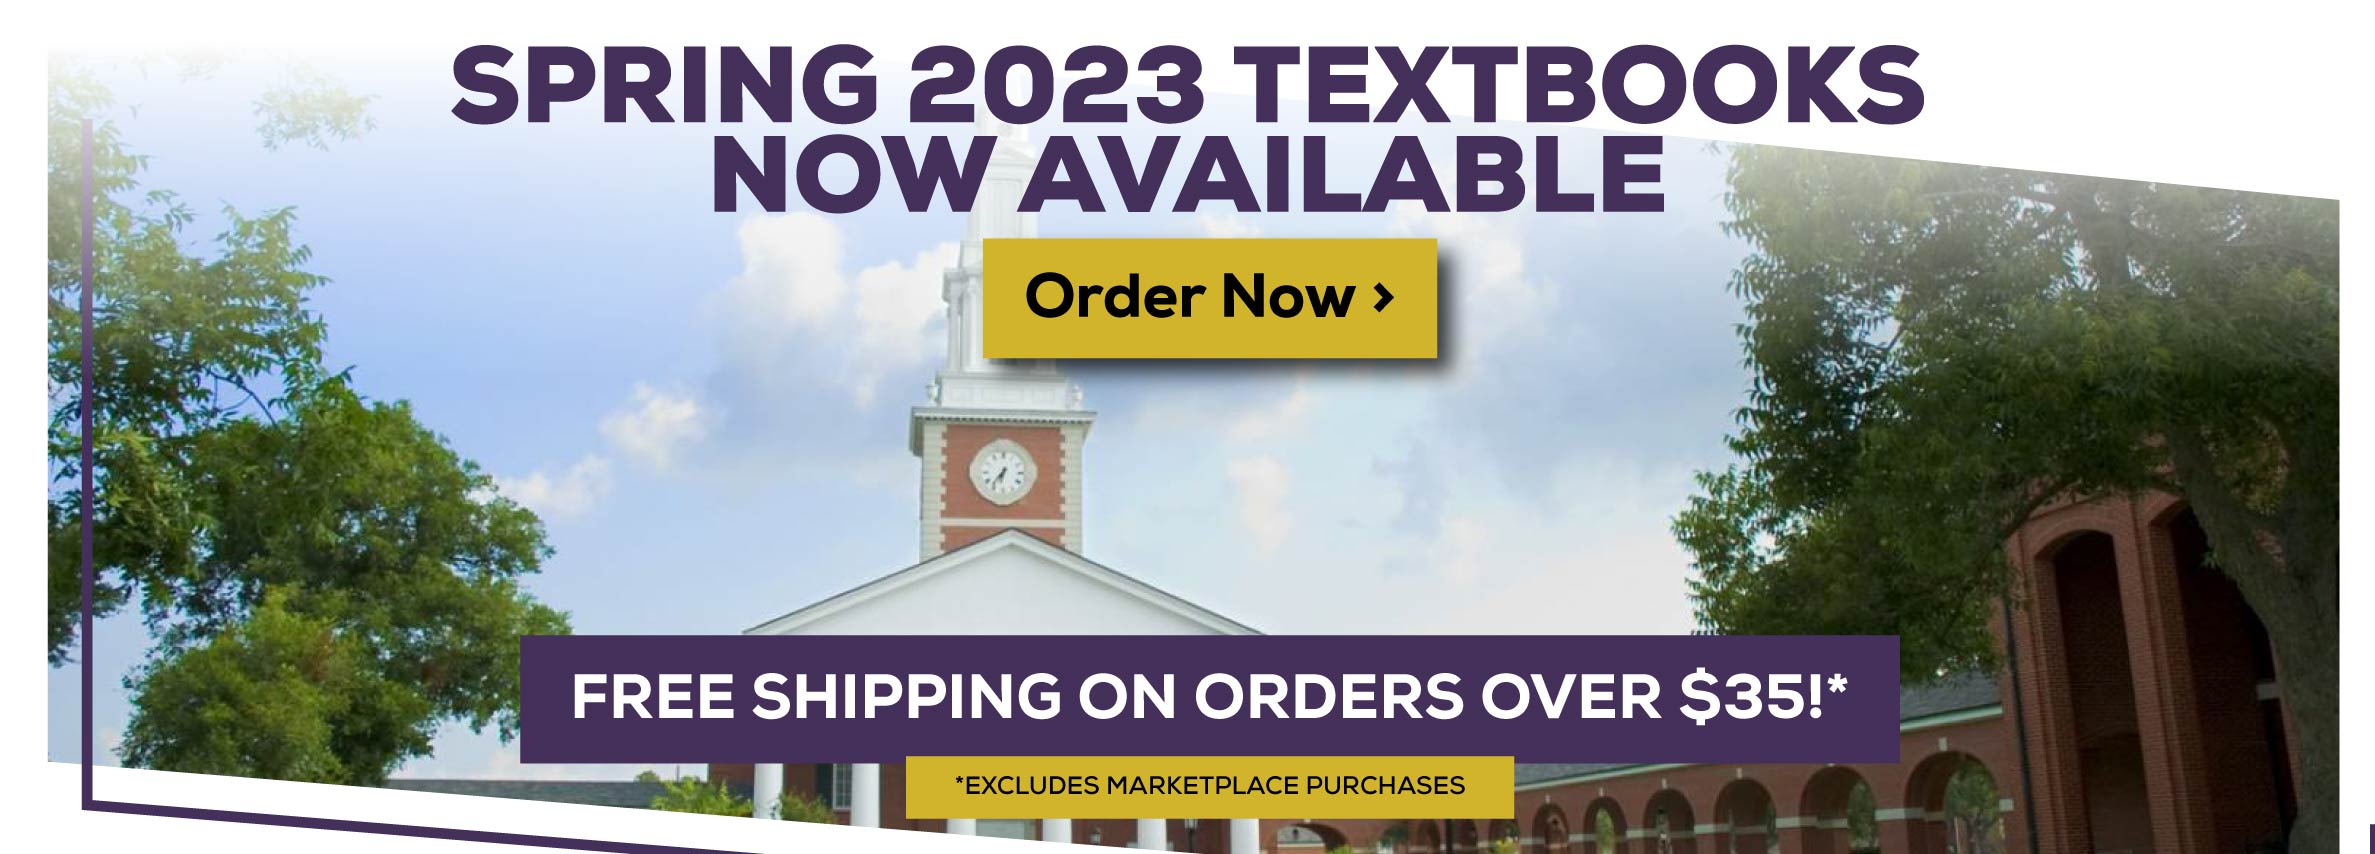 Spring 2023 Textbooks now available. order now. Free shipping on all orders over $35!